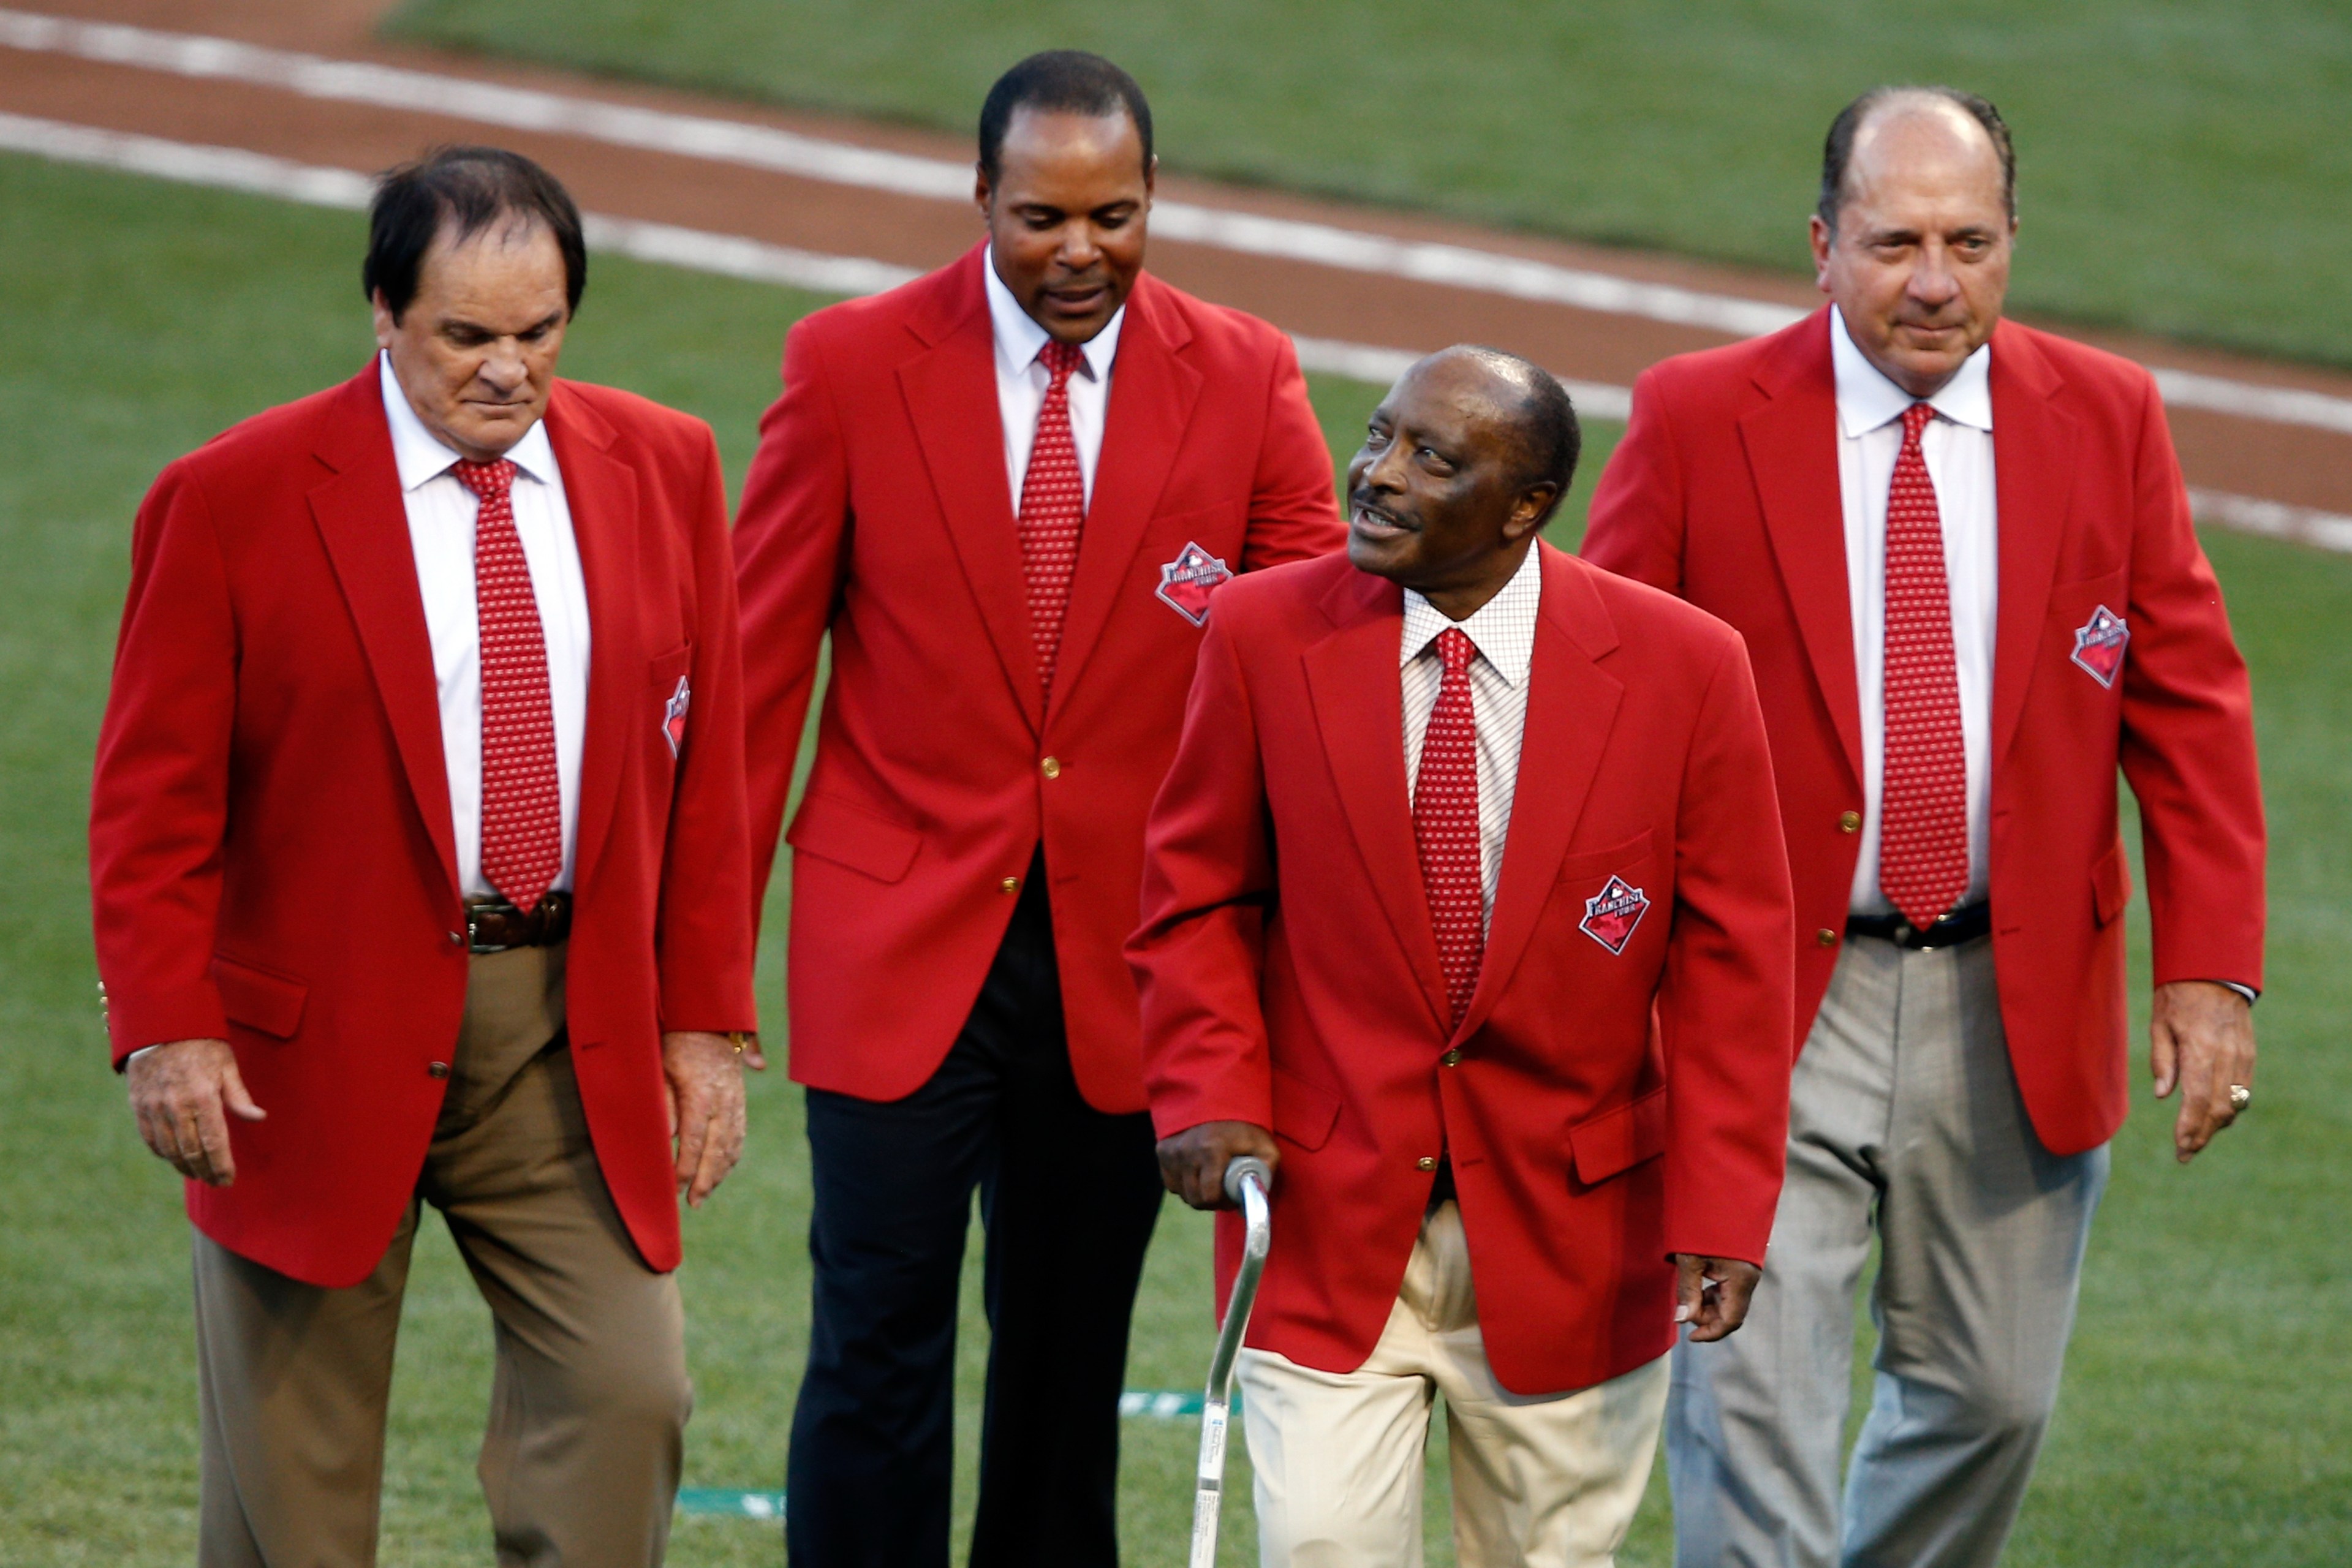 Joe Morgan with fellow Reds legends Pete Rose, Barry Larkin, and Johnny Bench at the 2019 MLB All-Star Game.